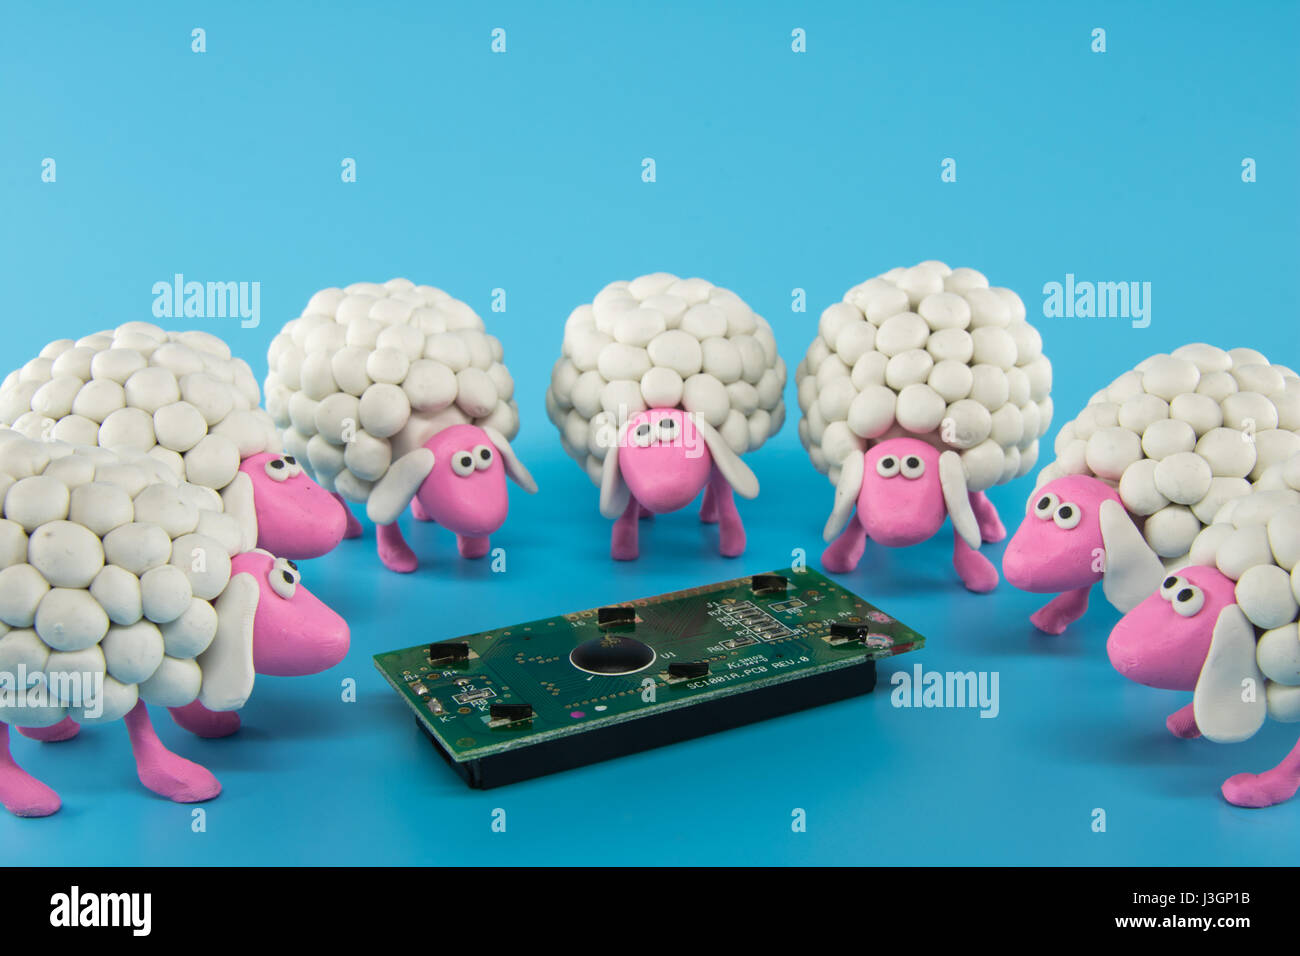 White polymer clay sheep gather around an electronic circuit on a blue background Stock Photo